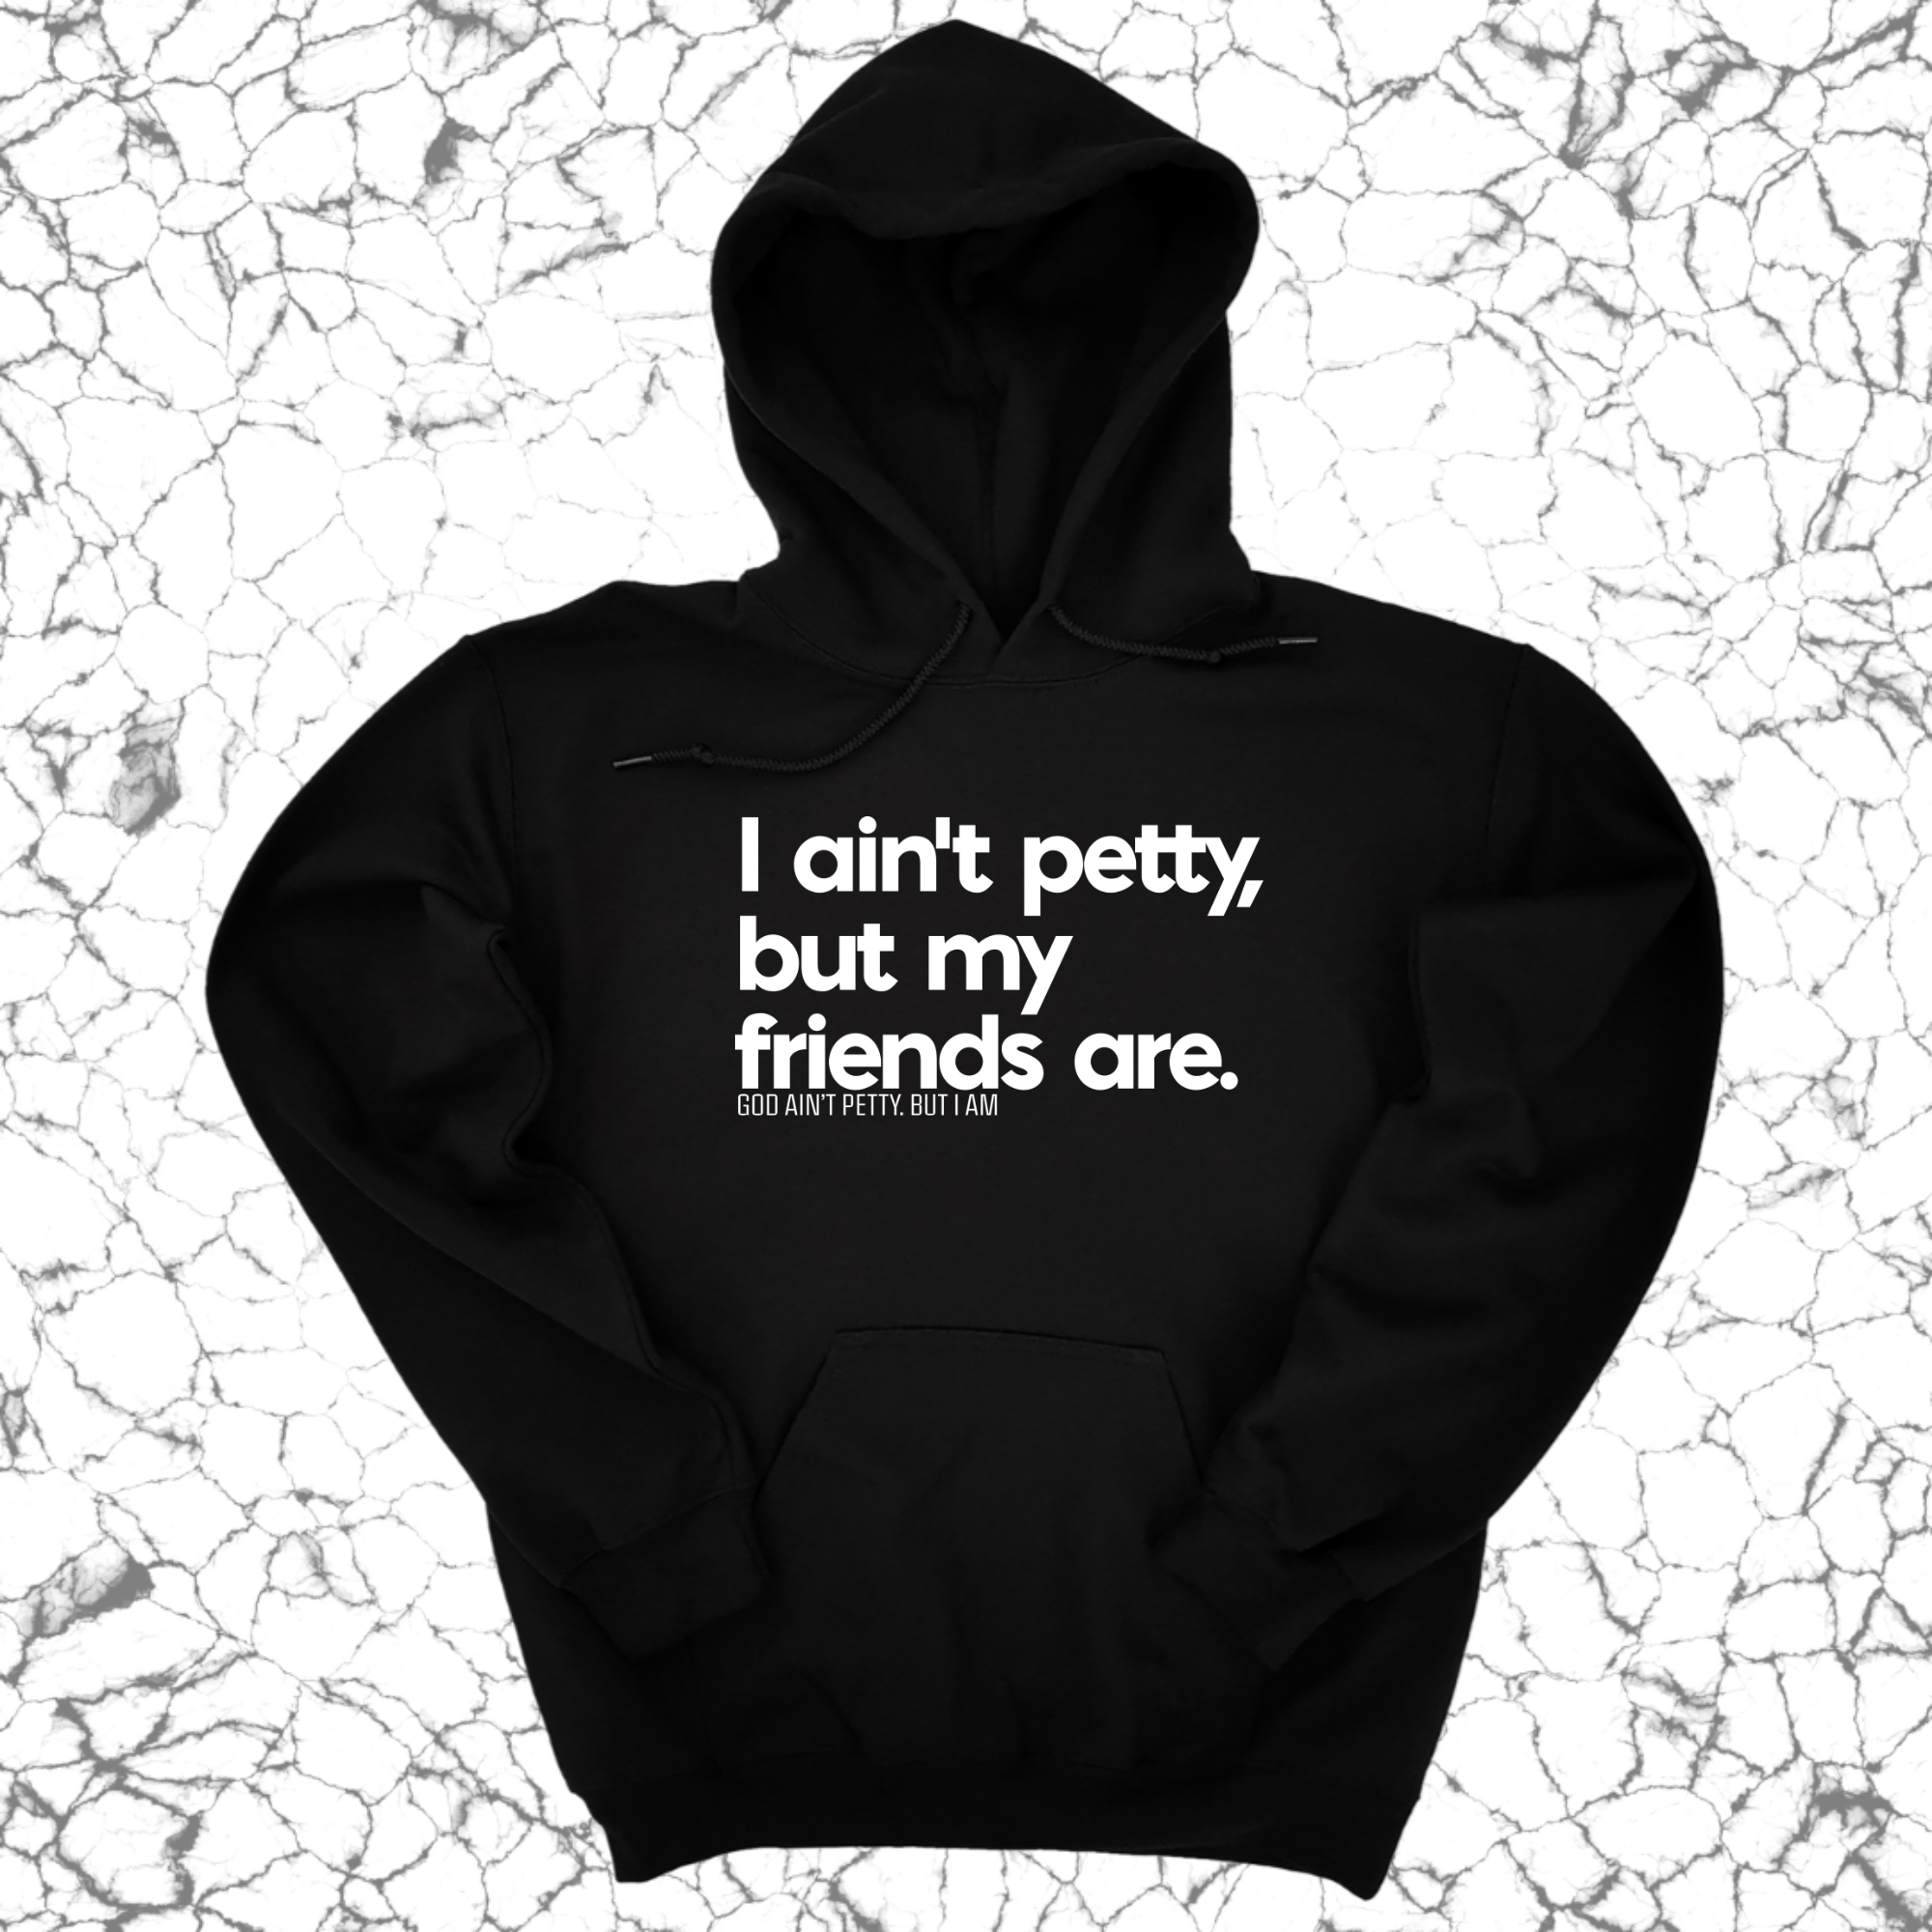 I ain't petty, but my friends are Unisex Hoodie-Hoodie-The Original God Ain't Petty But I Am